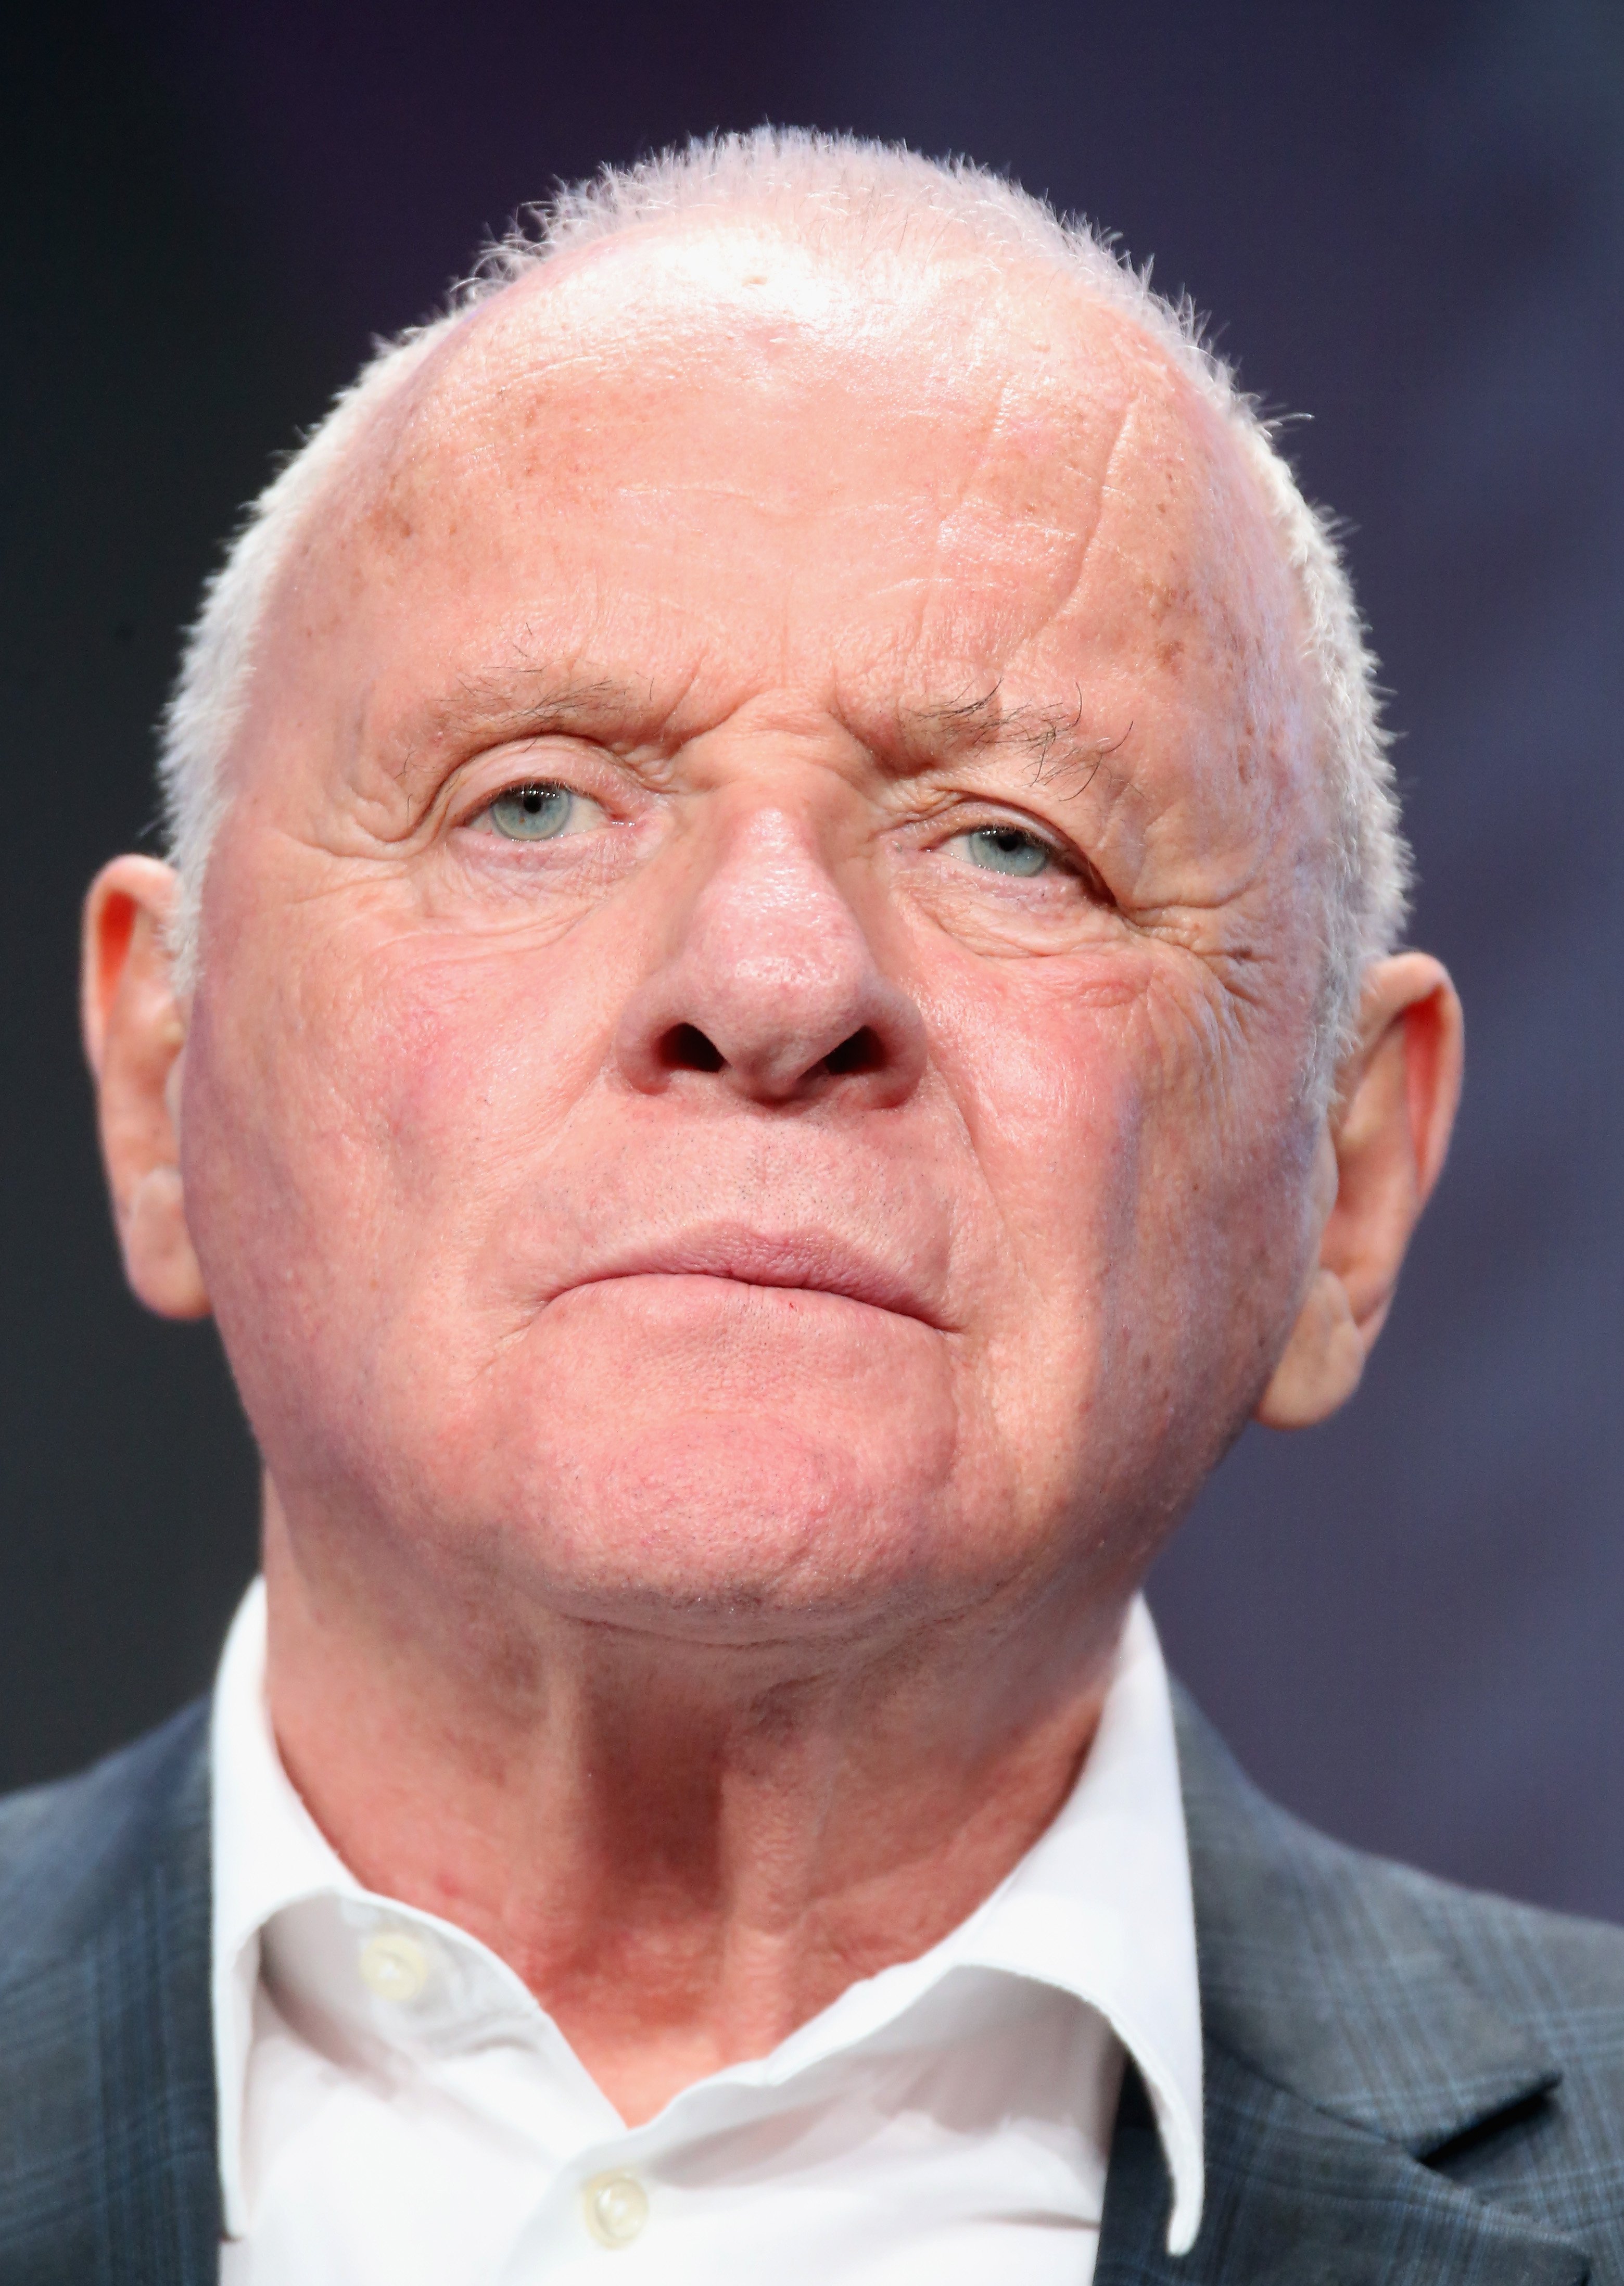 Anthony Hopkins during the "Westworld" panel discussion at the HBO portion of the 2016 Television Critics Association Summer Tour at The Beverly Hilton Hotel on July 30, 2016 in Beverly Hills, California. / Source: Getty Images